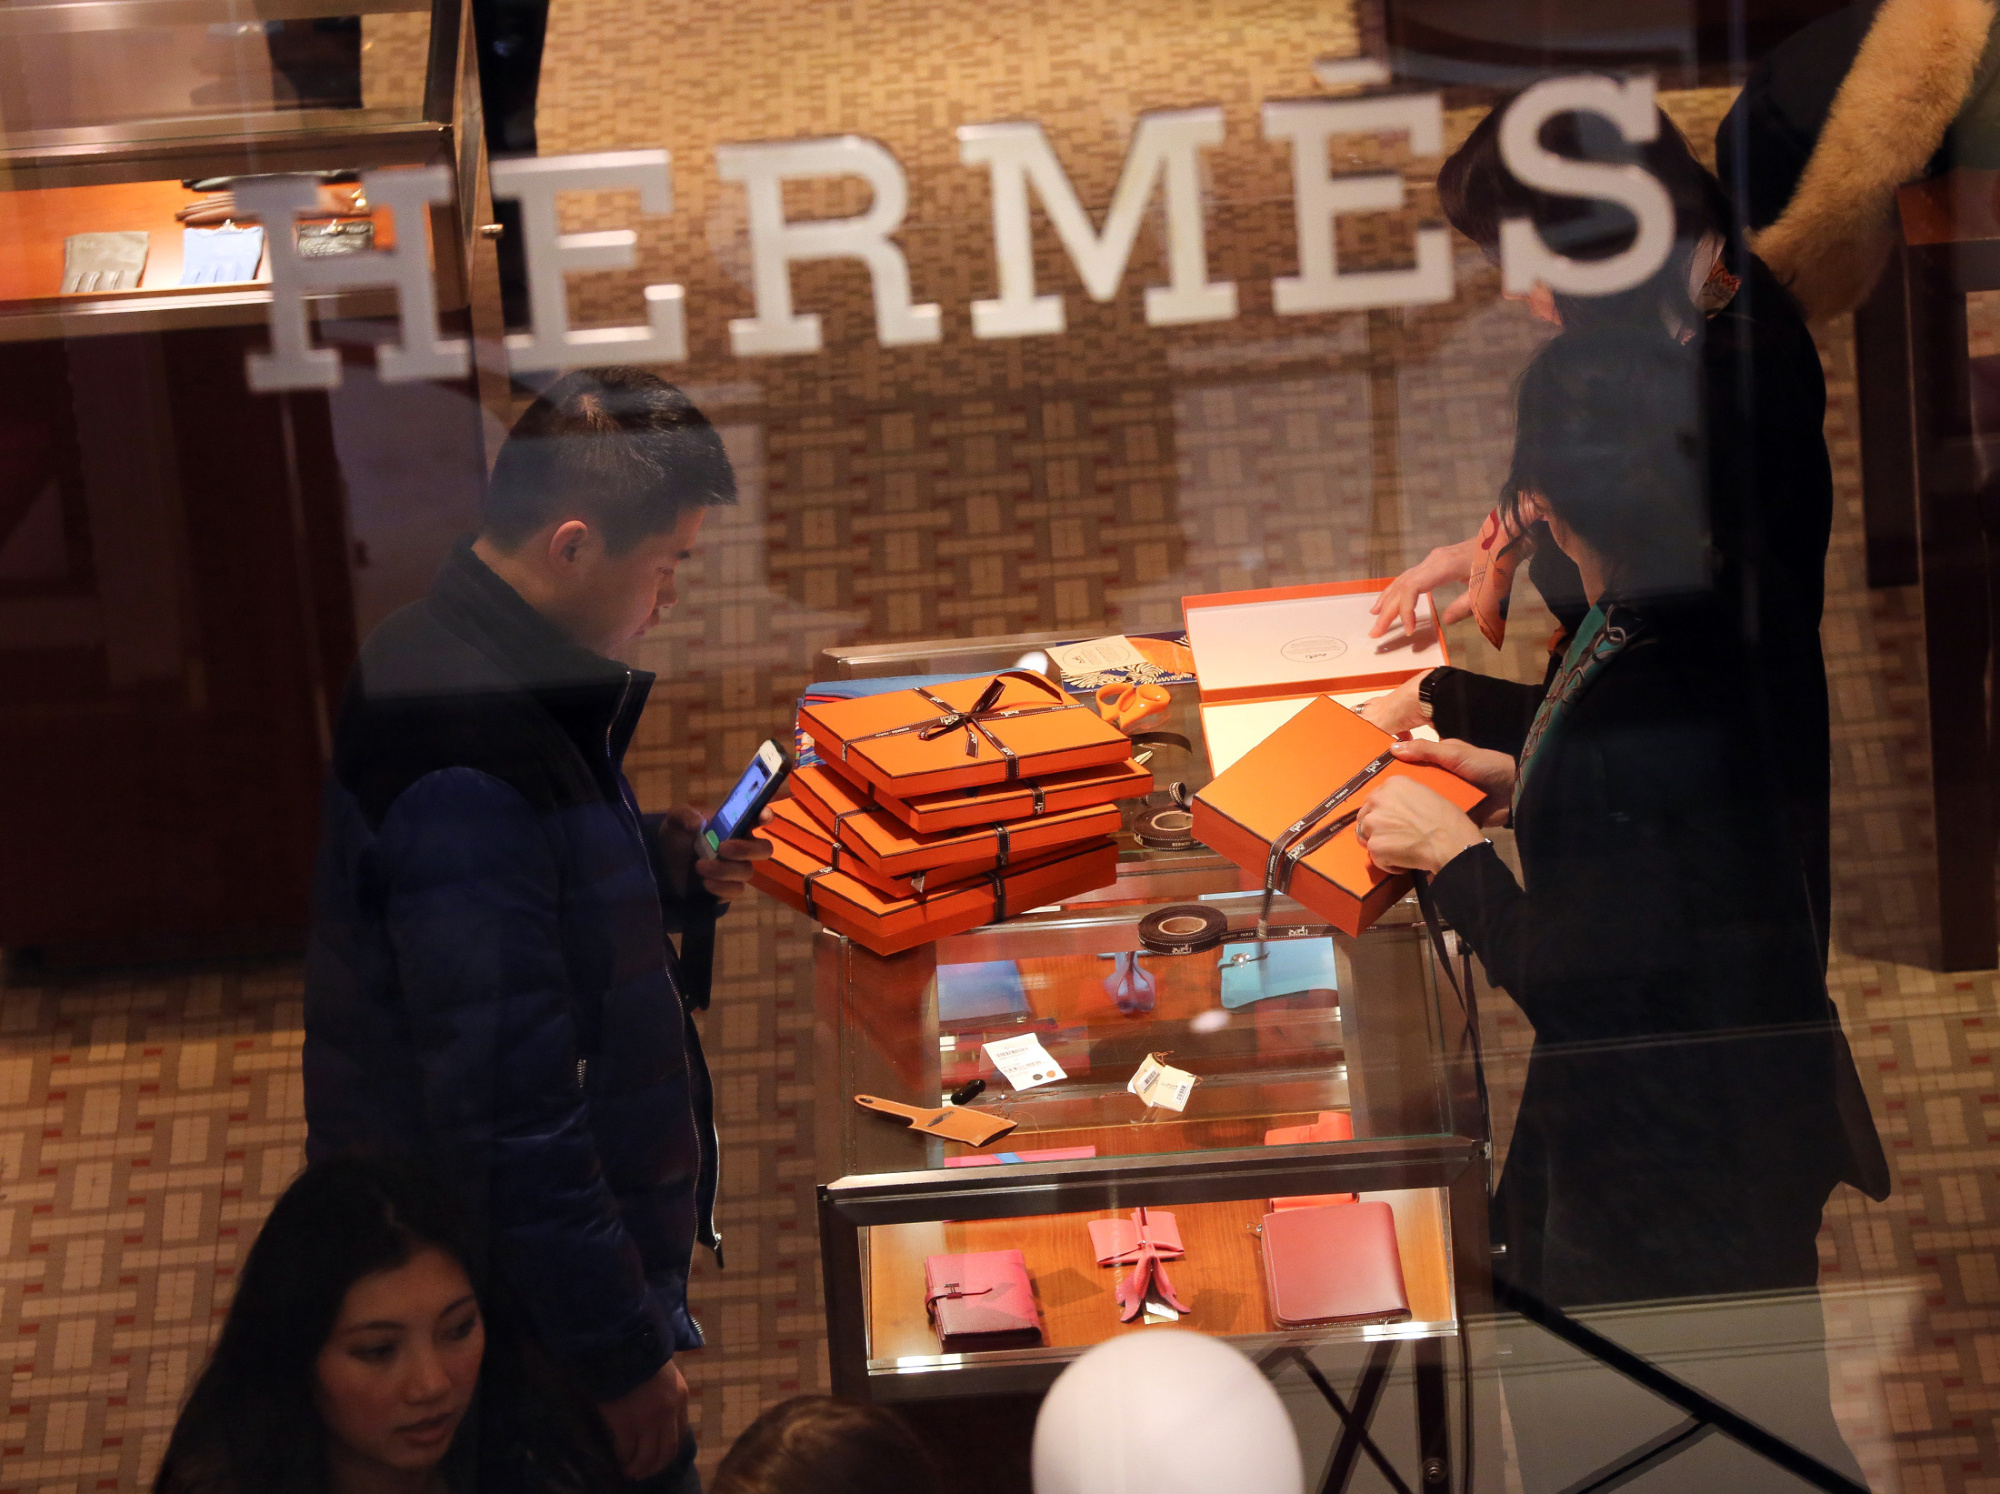 Hermes (EPA:RMS) Sales Soar Despite Cost-of-Living Crisis and China Covid  Policy - Bloomberg